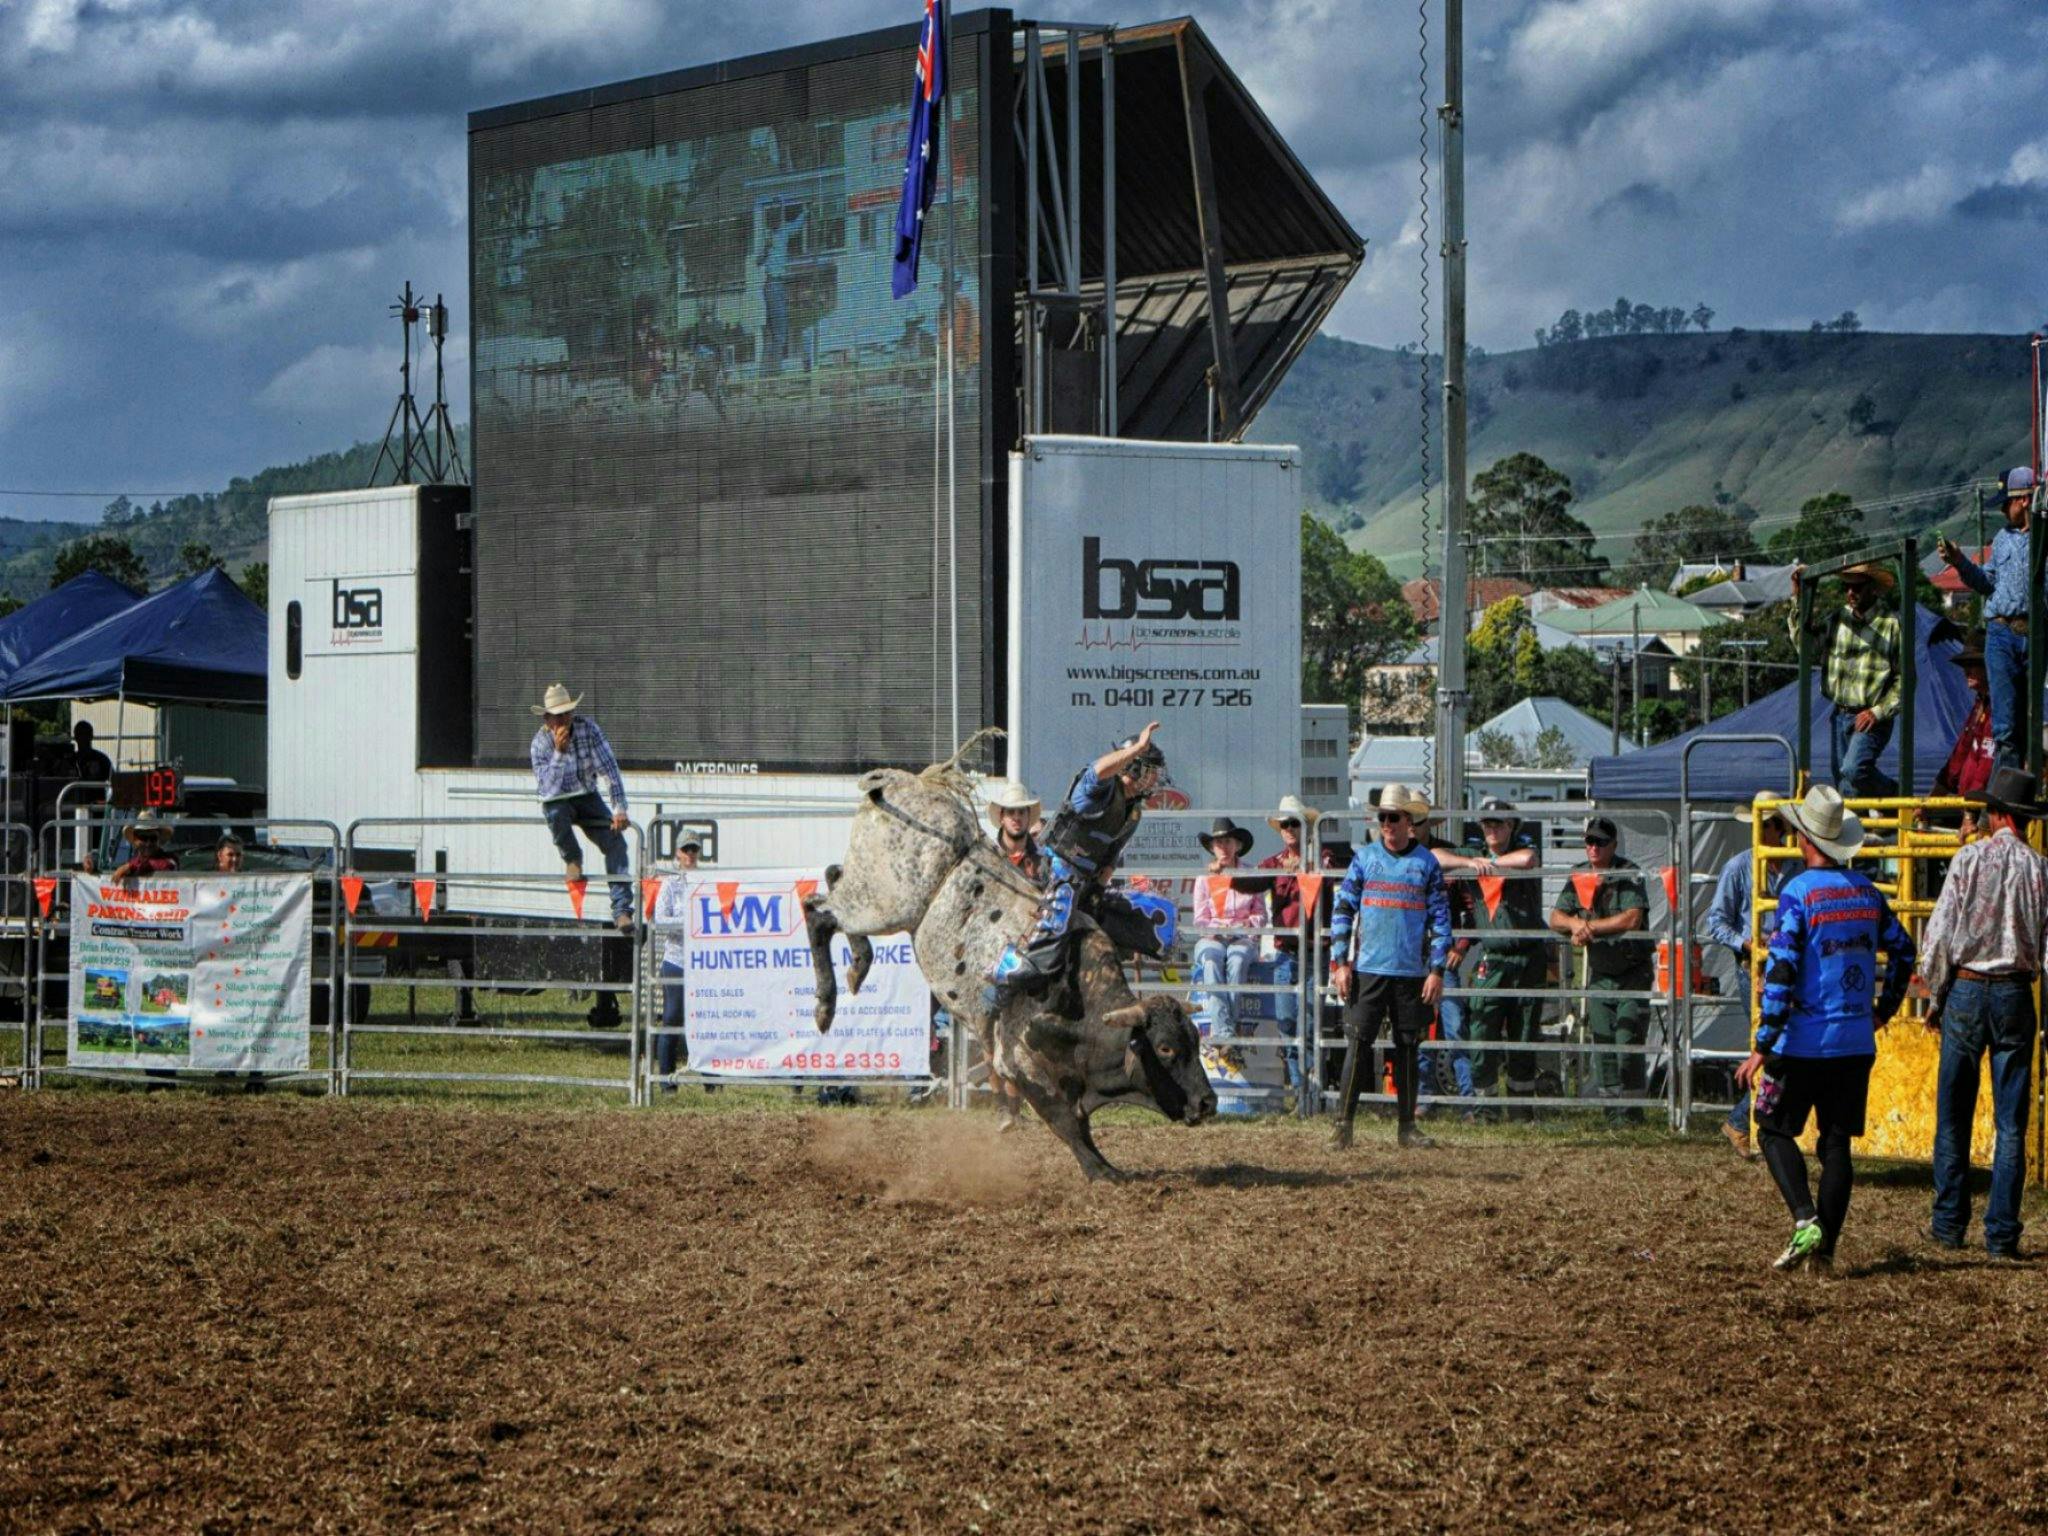 Dungog Rodeo NSW Holidays & Things to Do, Attractions